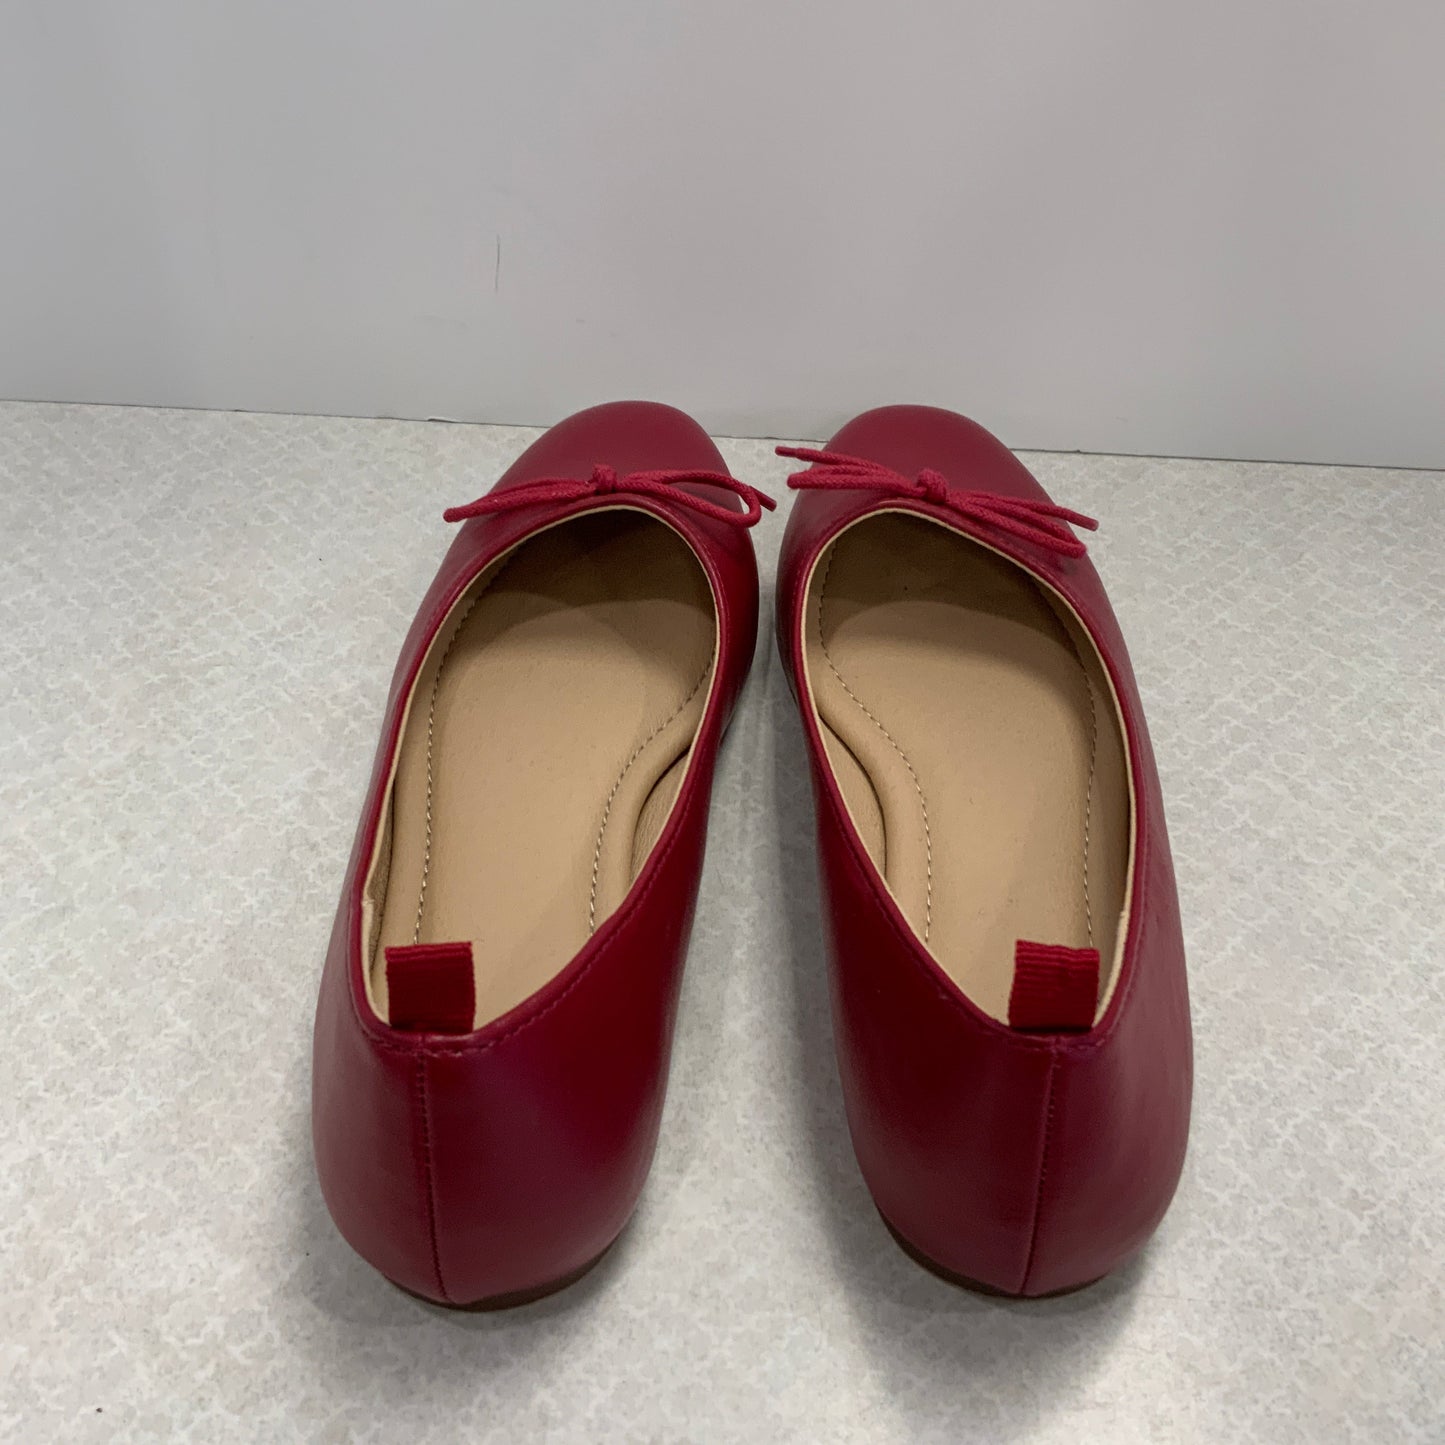 Red Shoes Flats Gap, Size 8